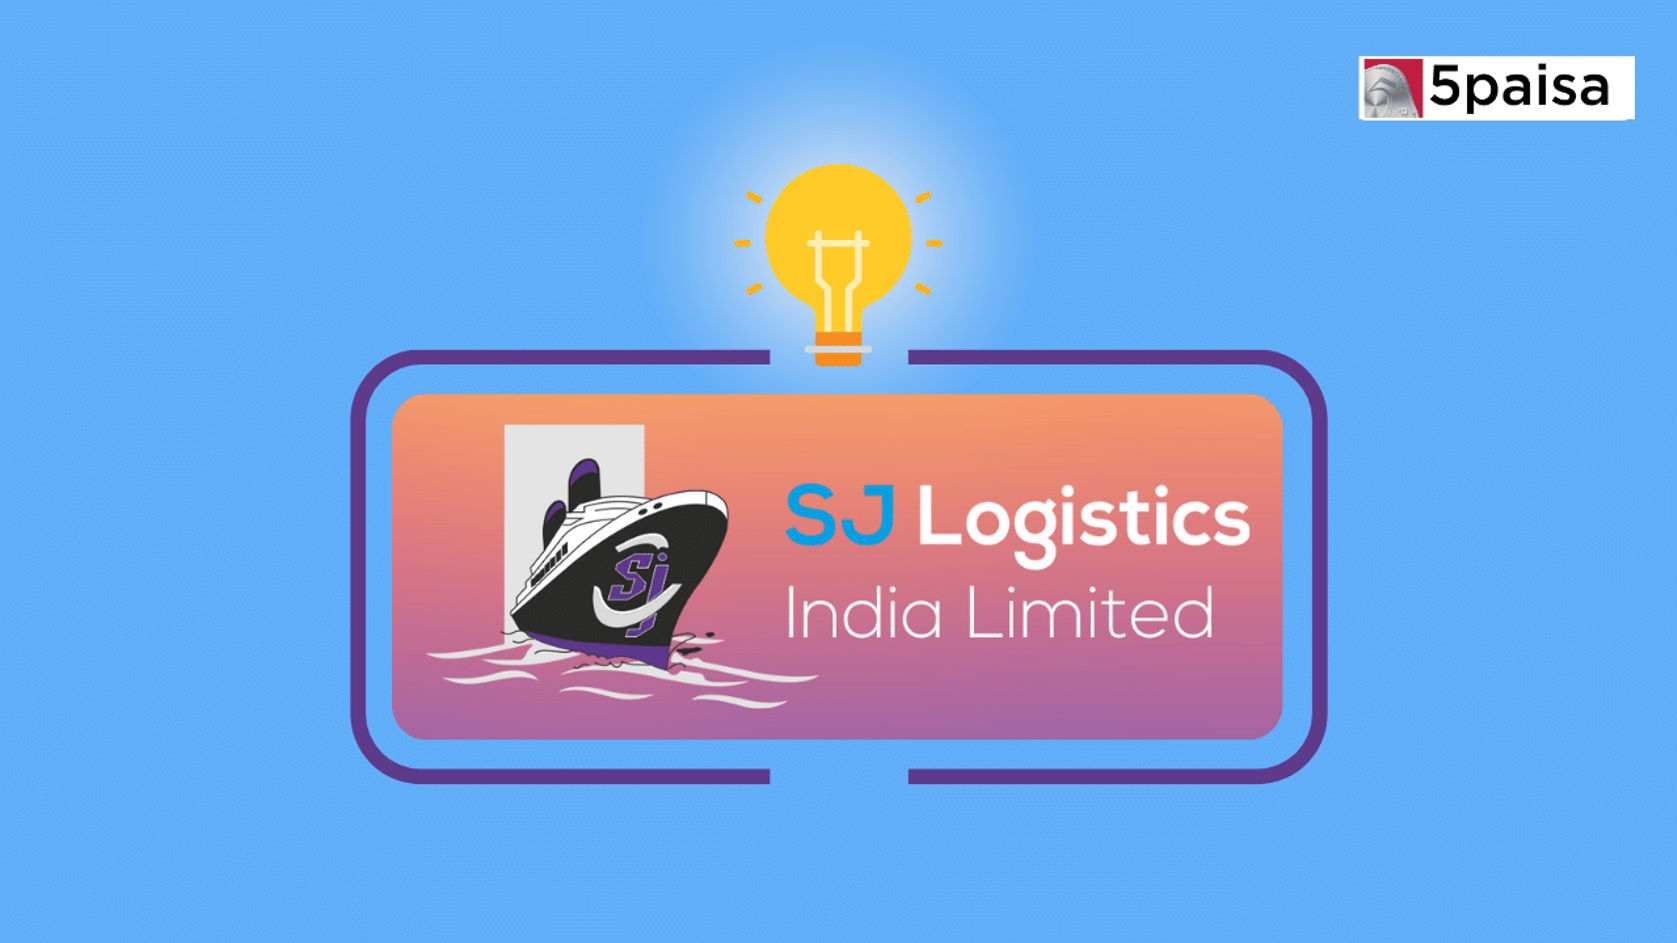 What you must know about S J Logistics IPO?